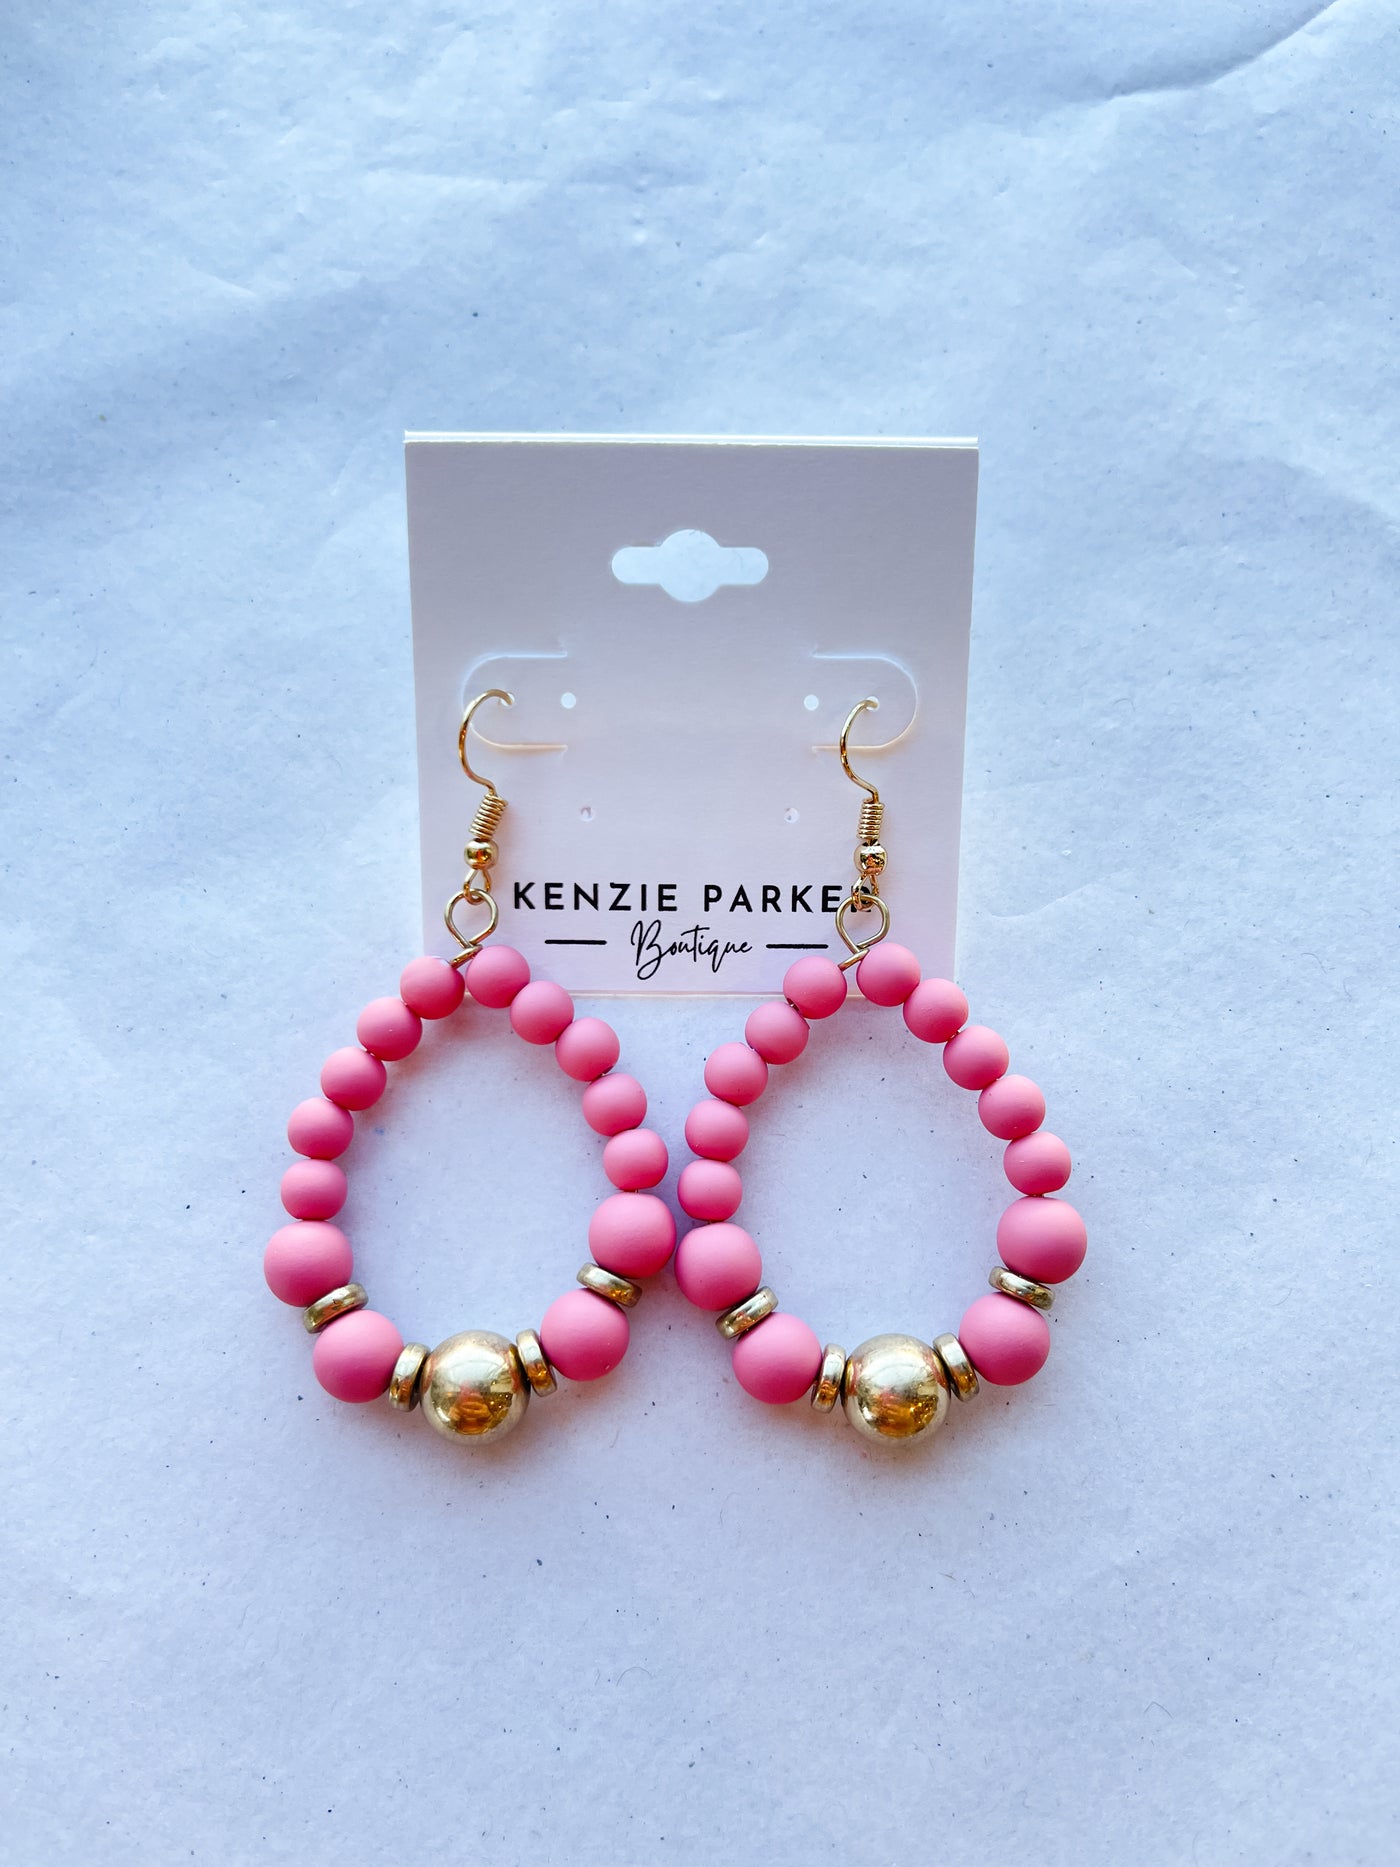 Charlotte Stain Ball Accent & Clay Ball Earrings